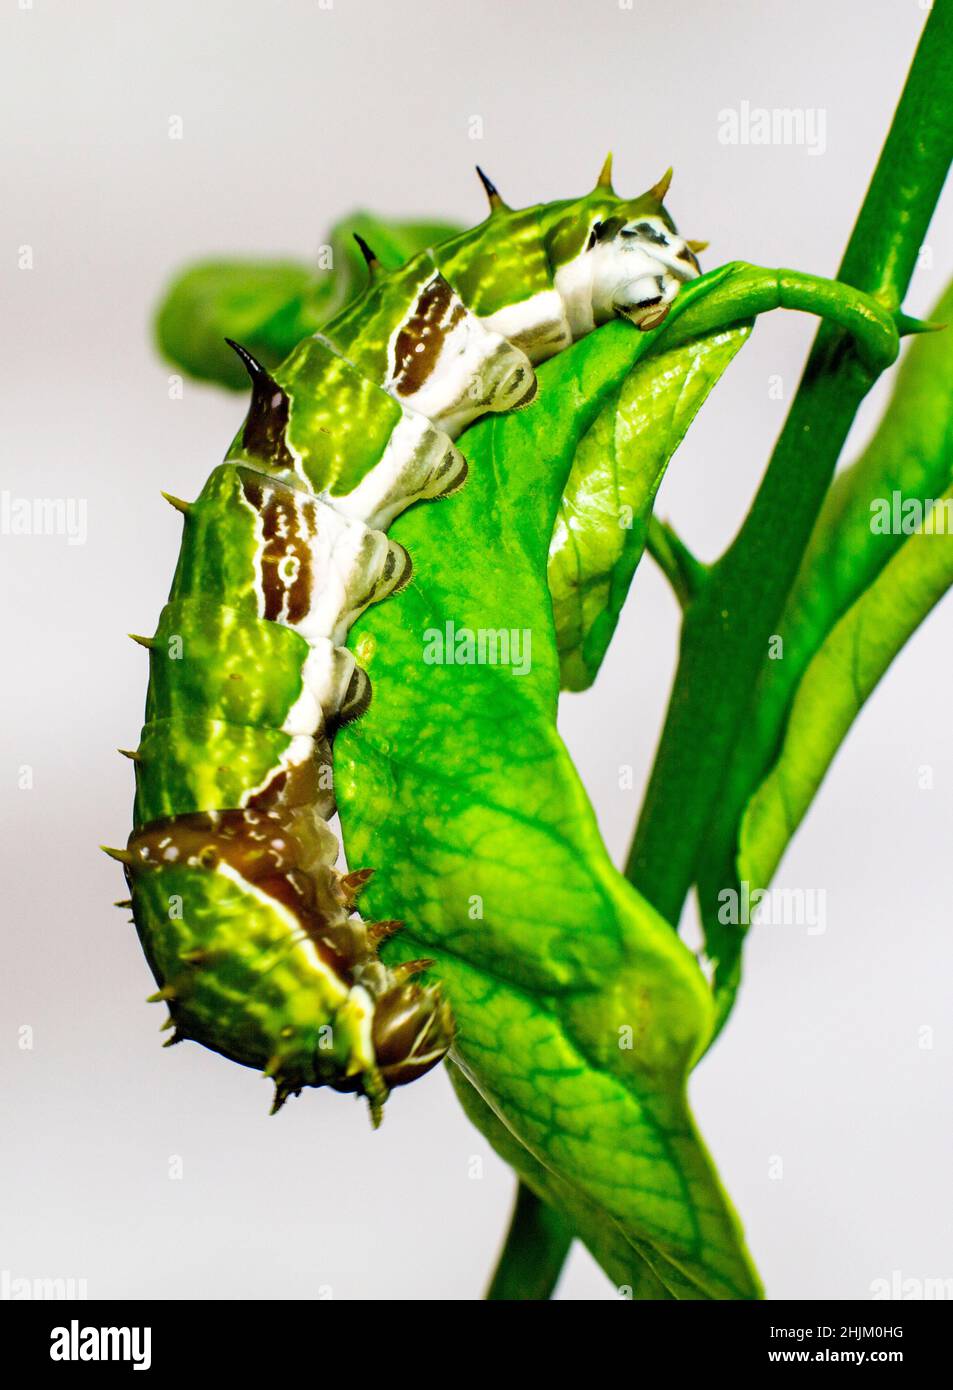 Lateral view of the Orchard Swallowtail Caterpillar on Lemon Tree Leaf with green body, diagonal brown patches and dorsal spines Stock Photo